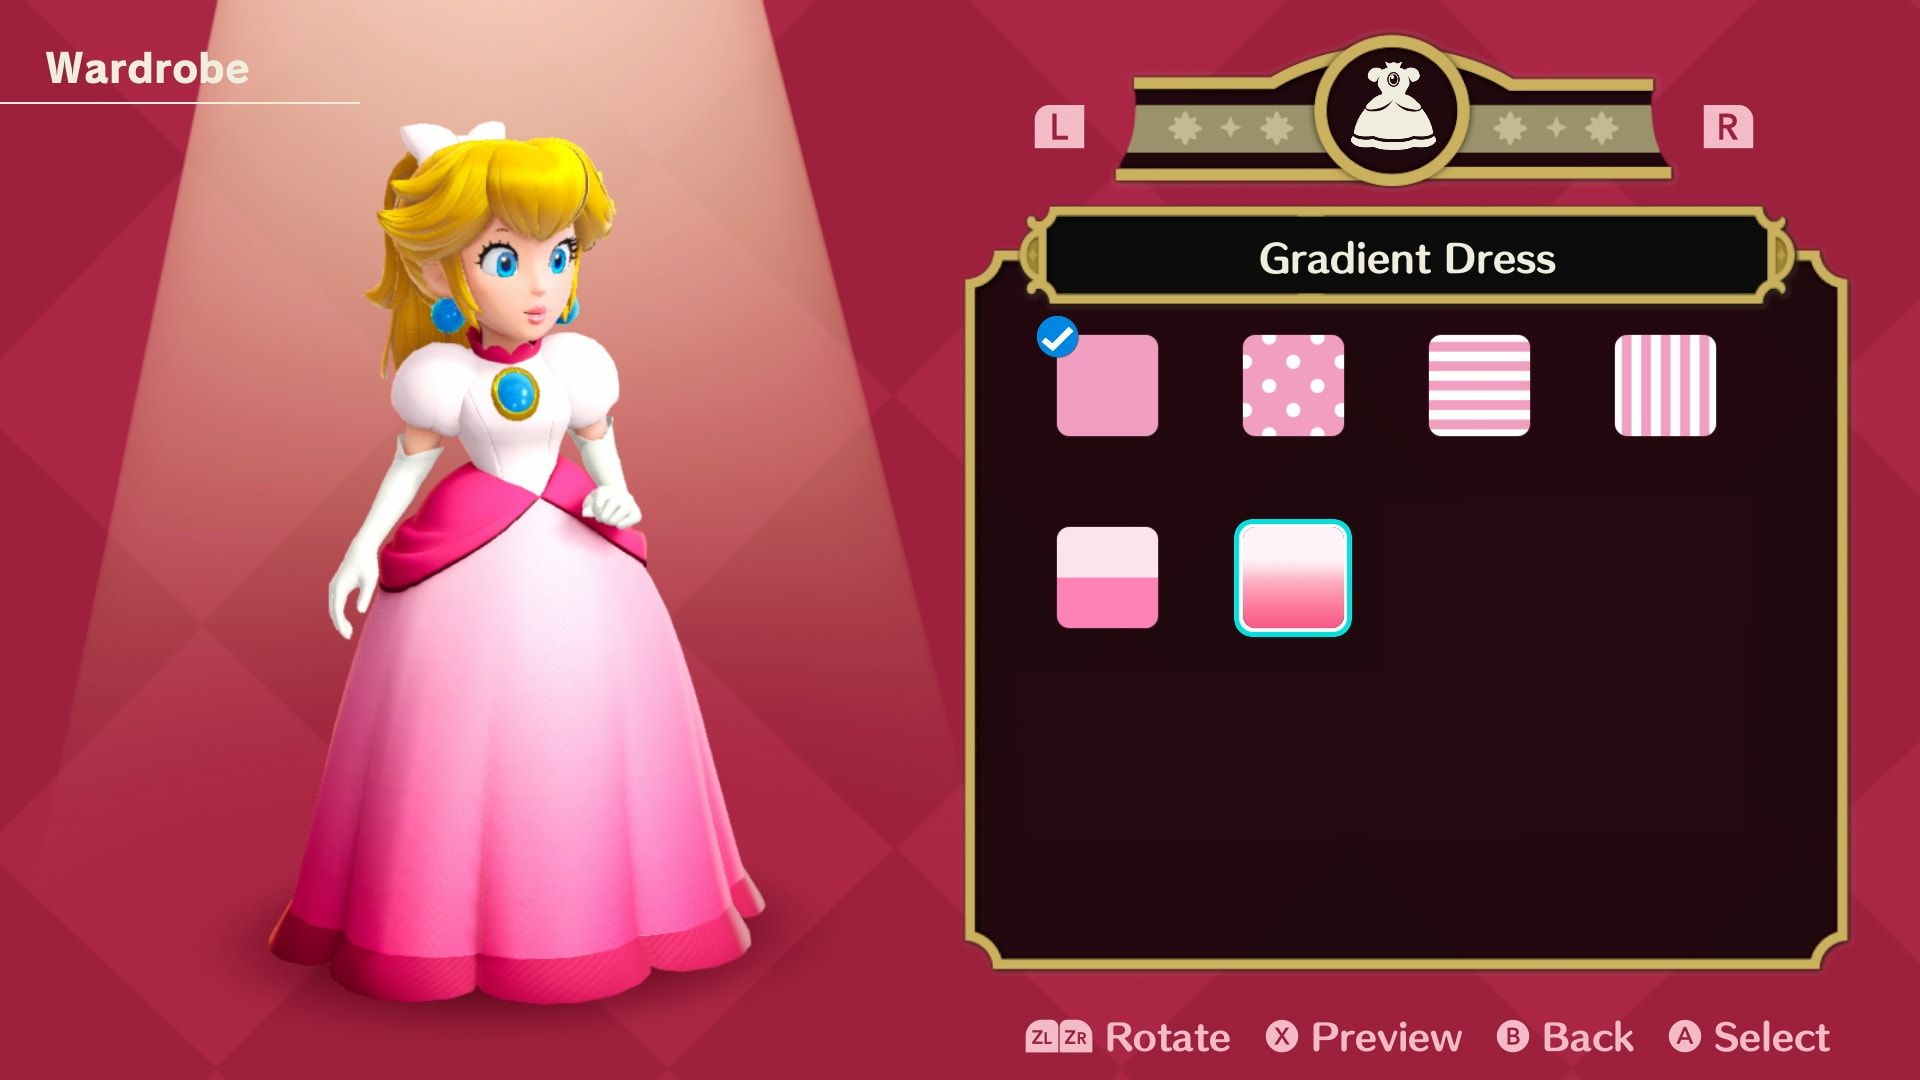 Customize Peach and Stella’s looks 